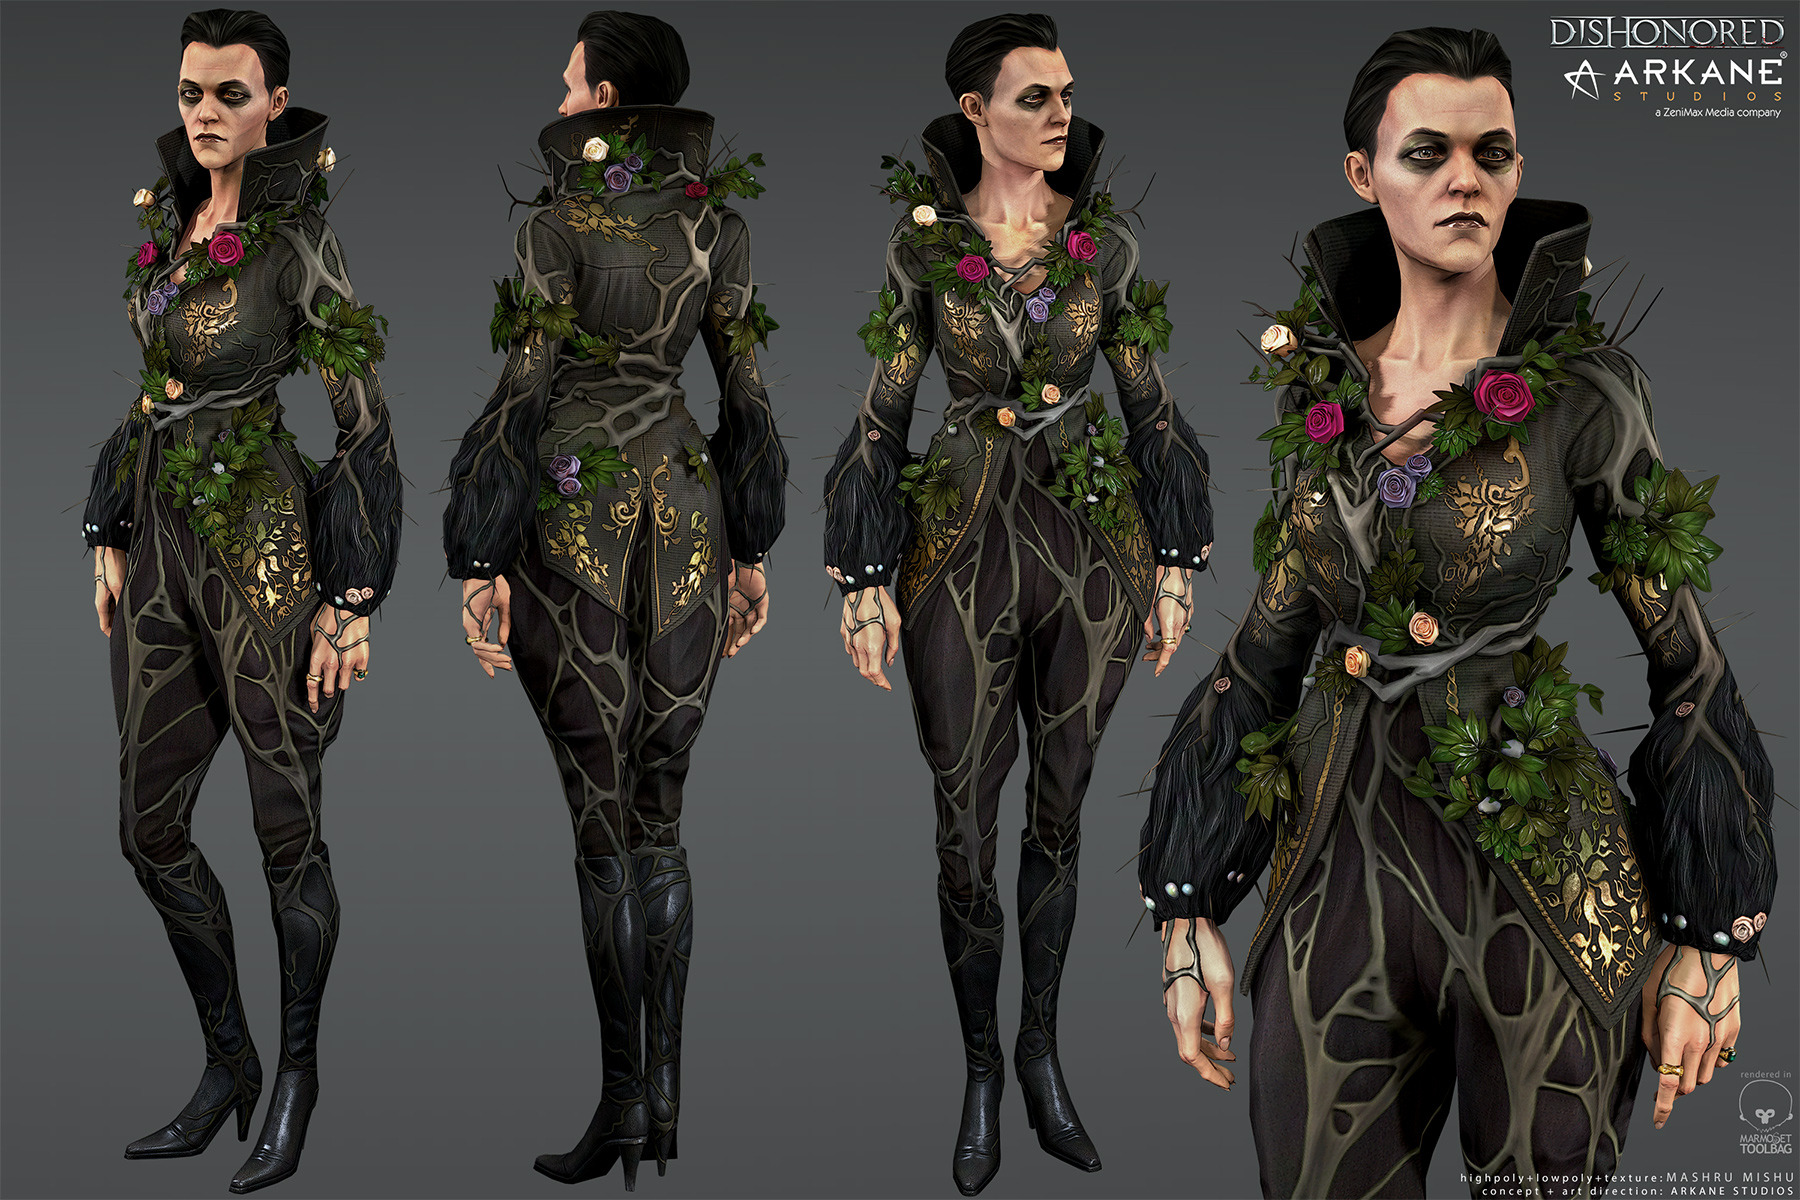 http://img2.wikia.nocookie.net/__cb20140329092123/dishonored/ru/images/1/1e/Delilah_concept_art.jpg